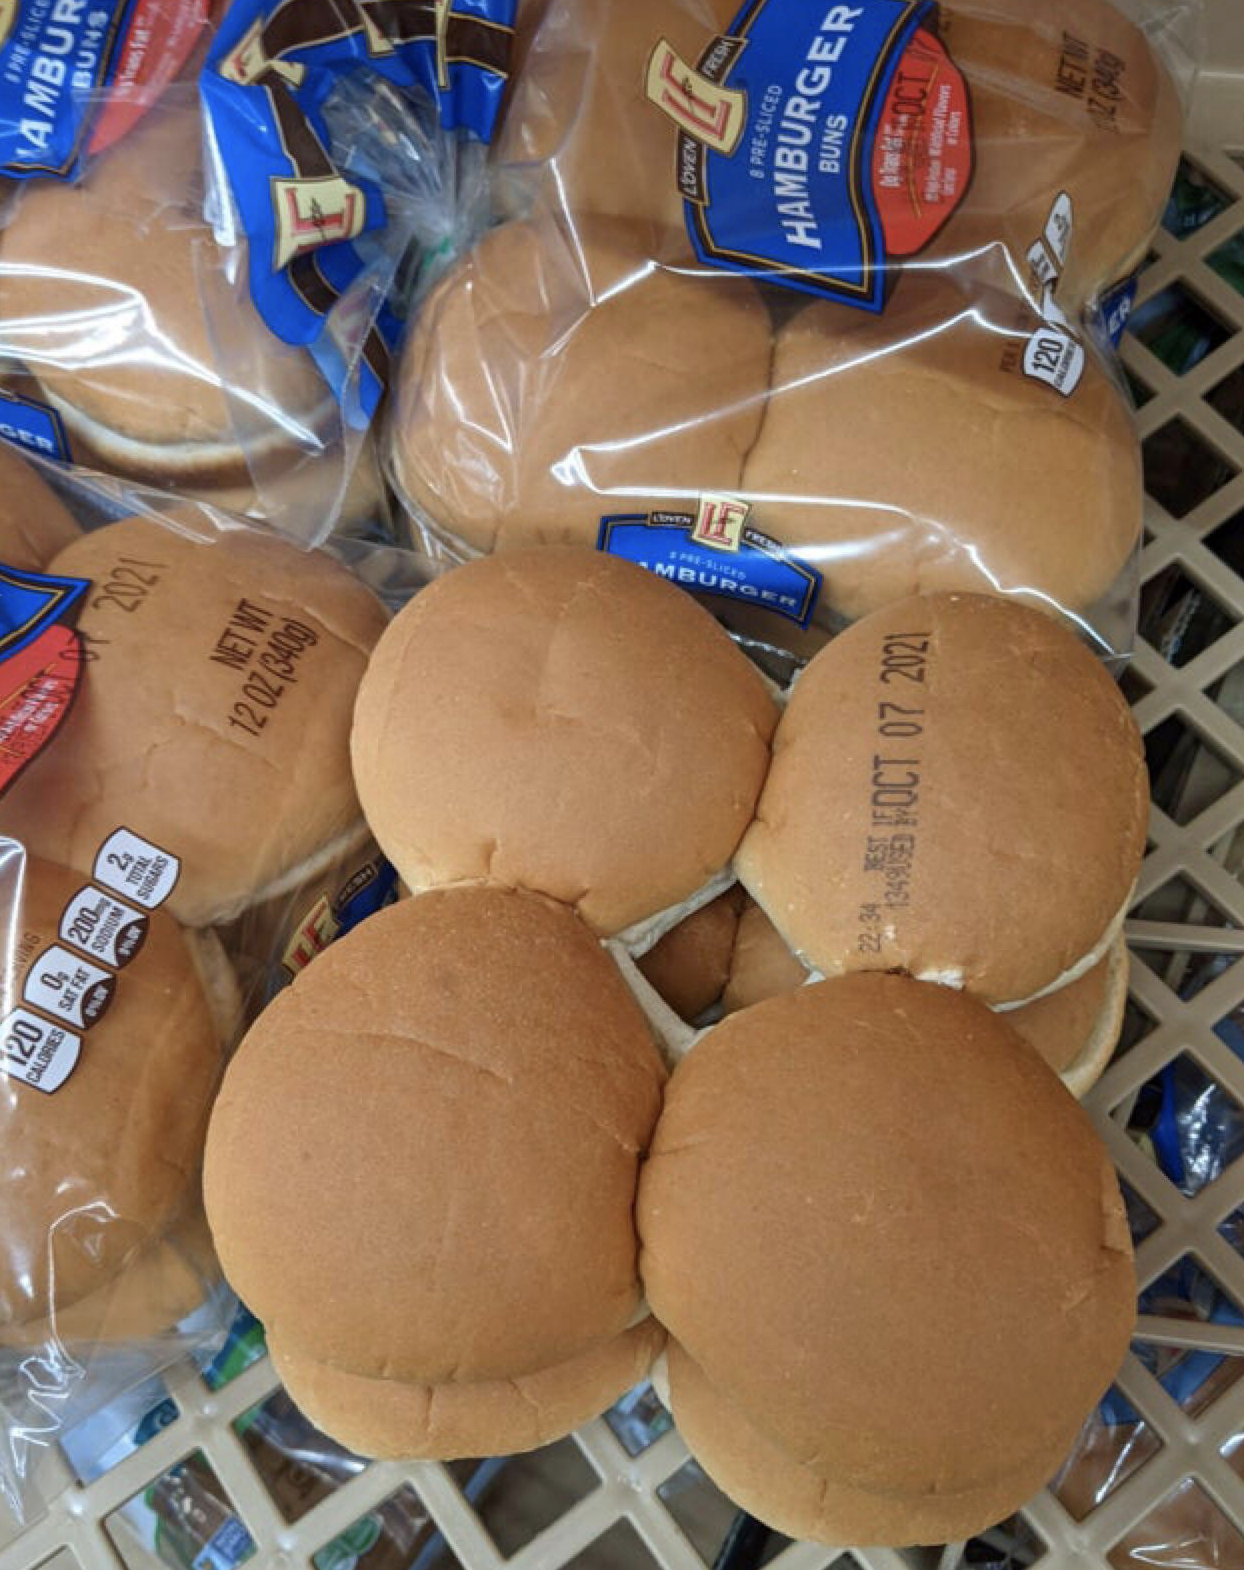 Hamburger buns with expiration dates on the actual bread